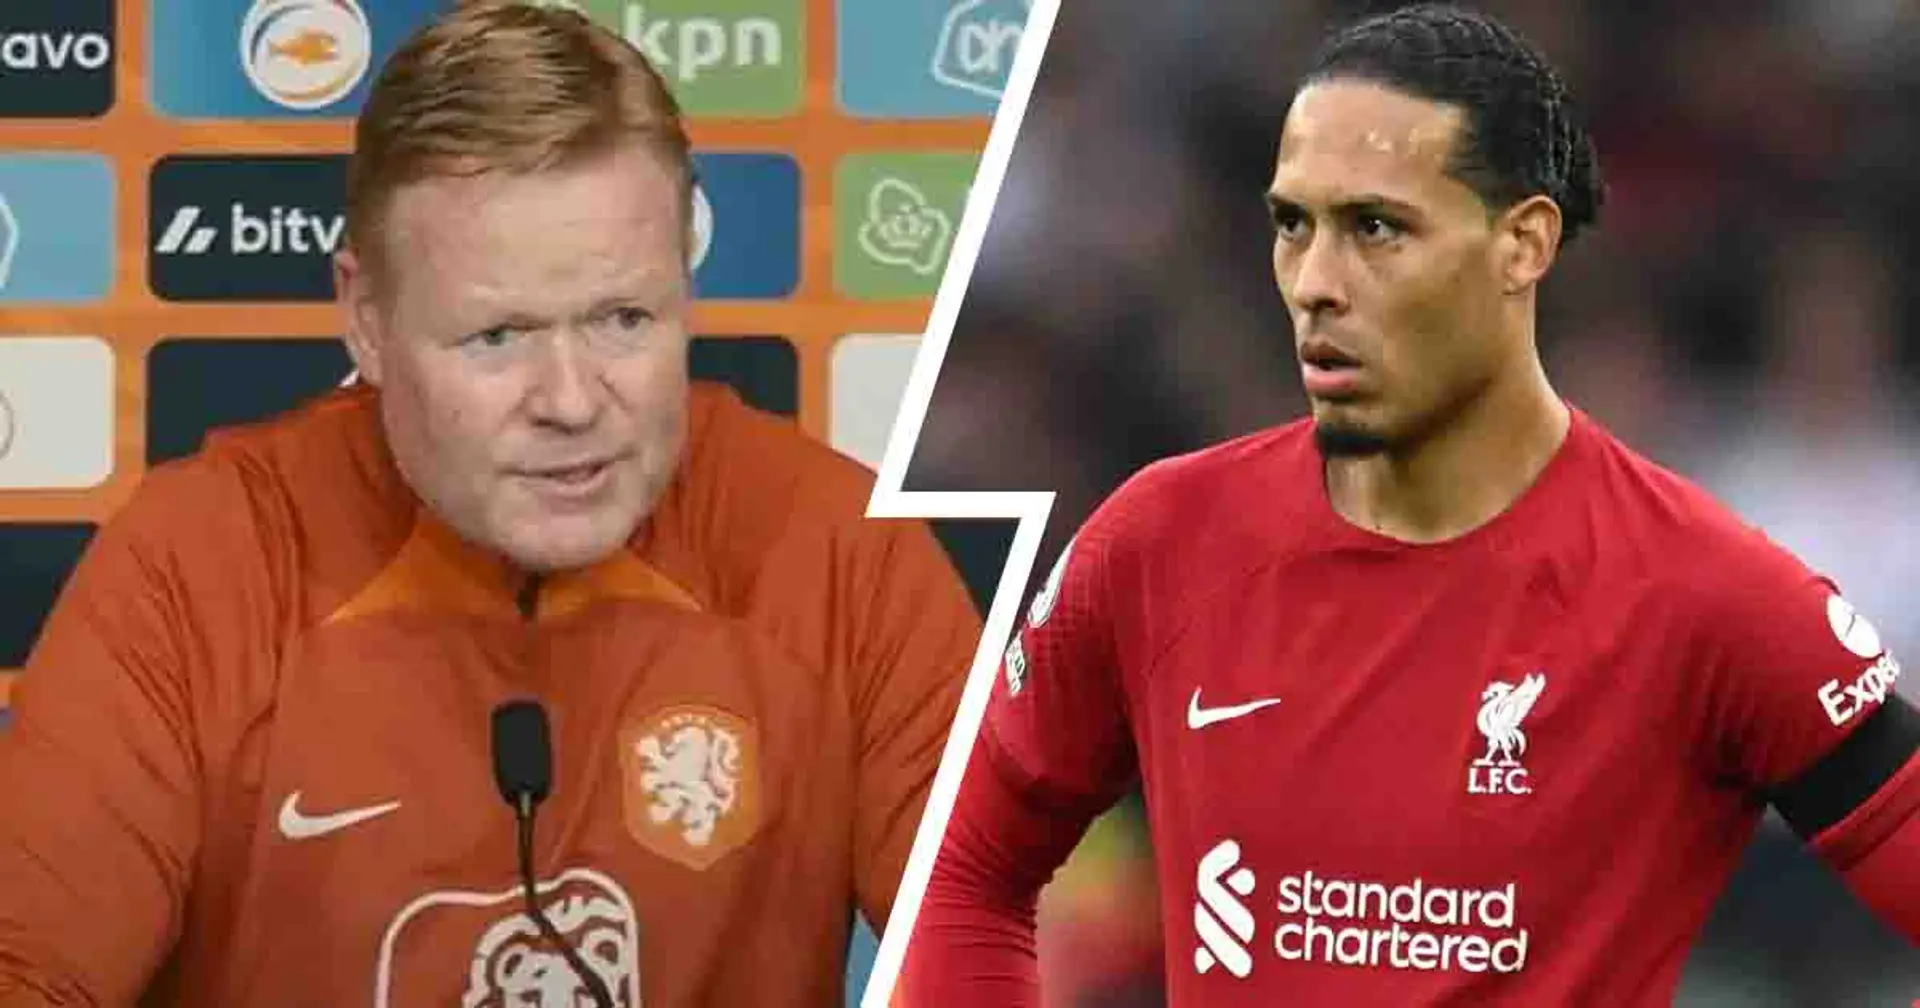 'The chance of mistakes has become greater': Ronald Koeman points reason behind Van Dijk's 'lesser form'